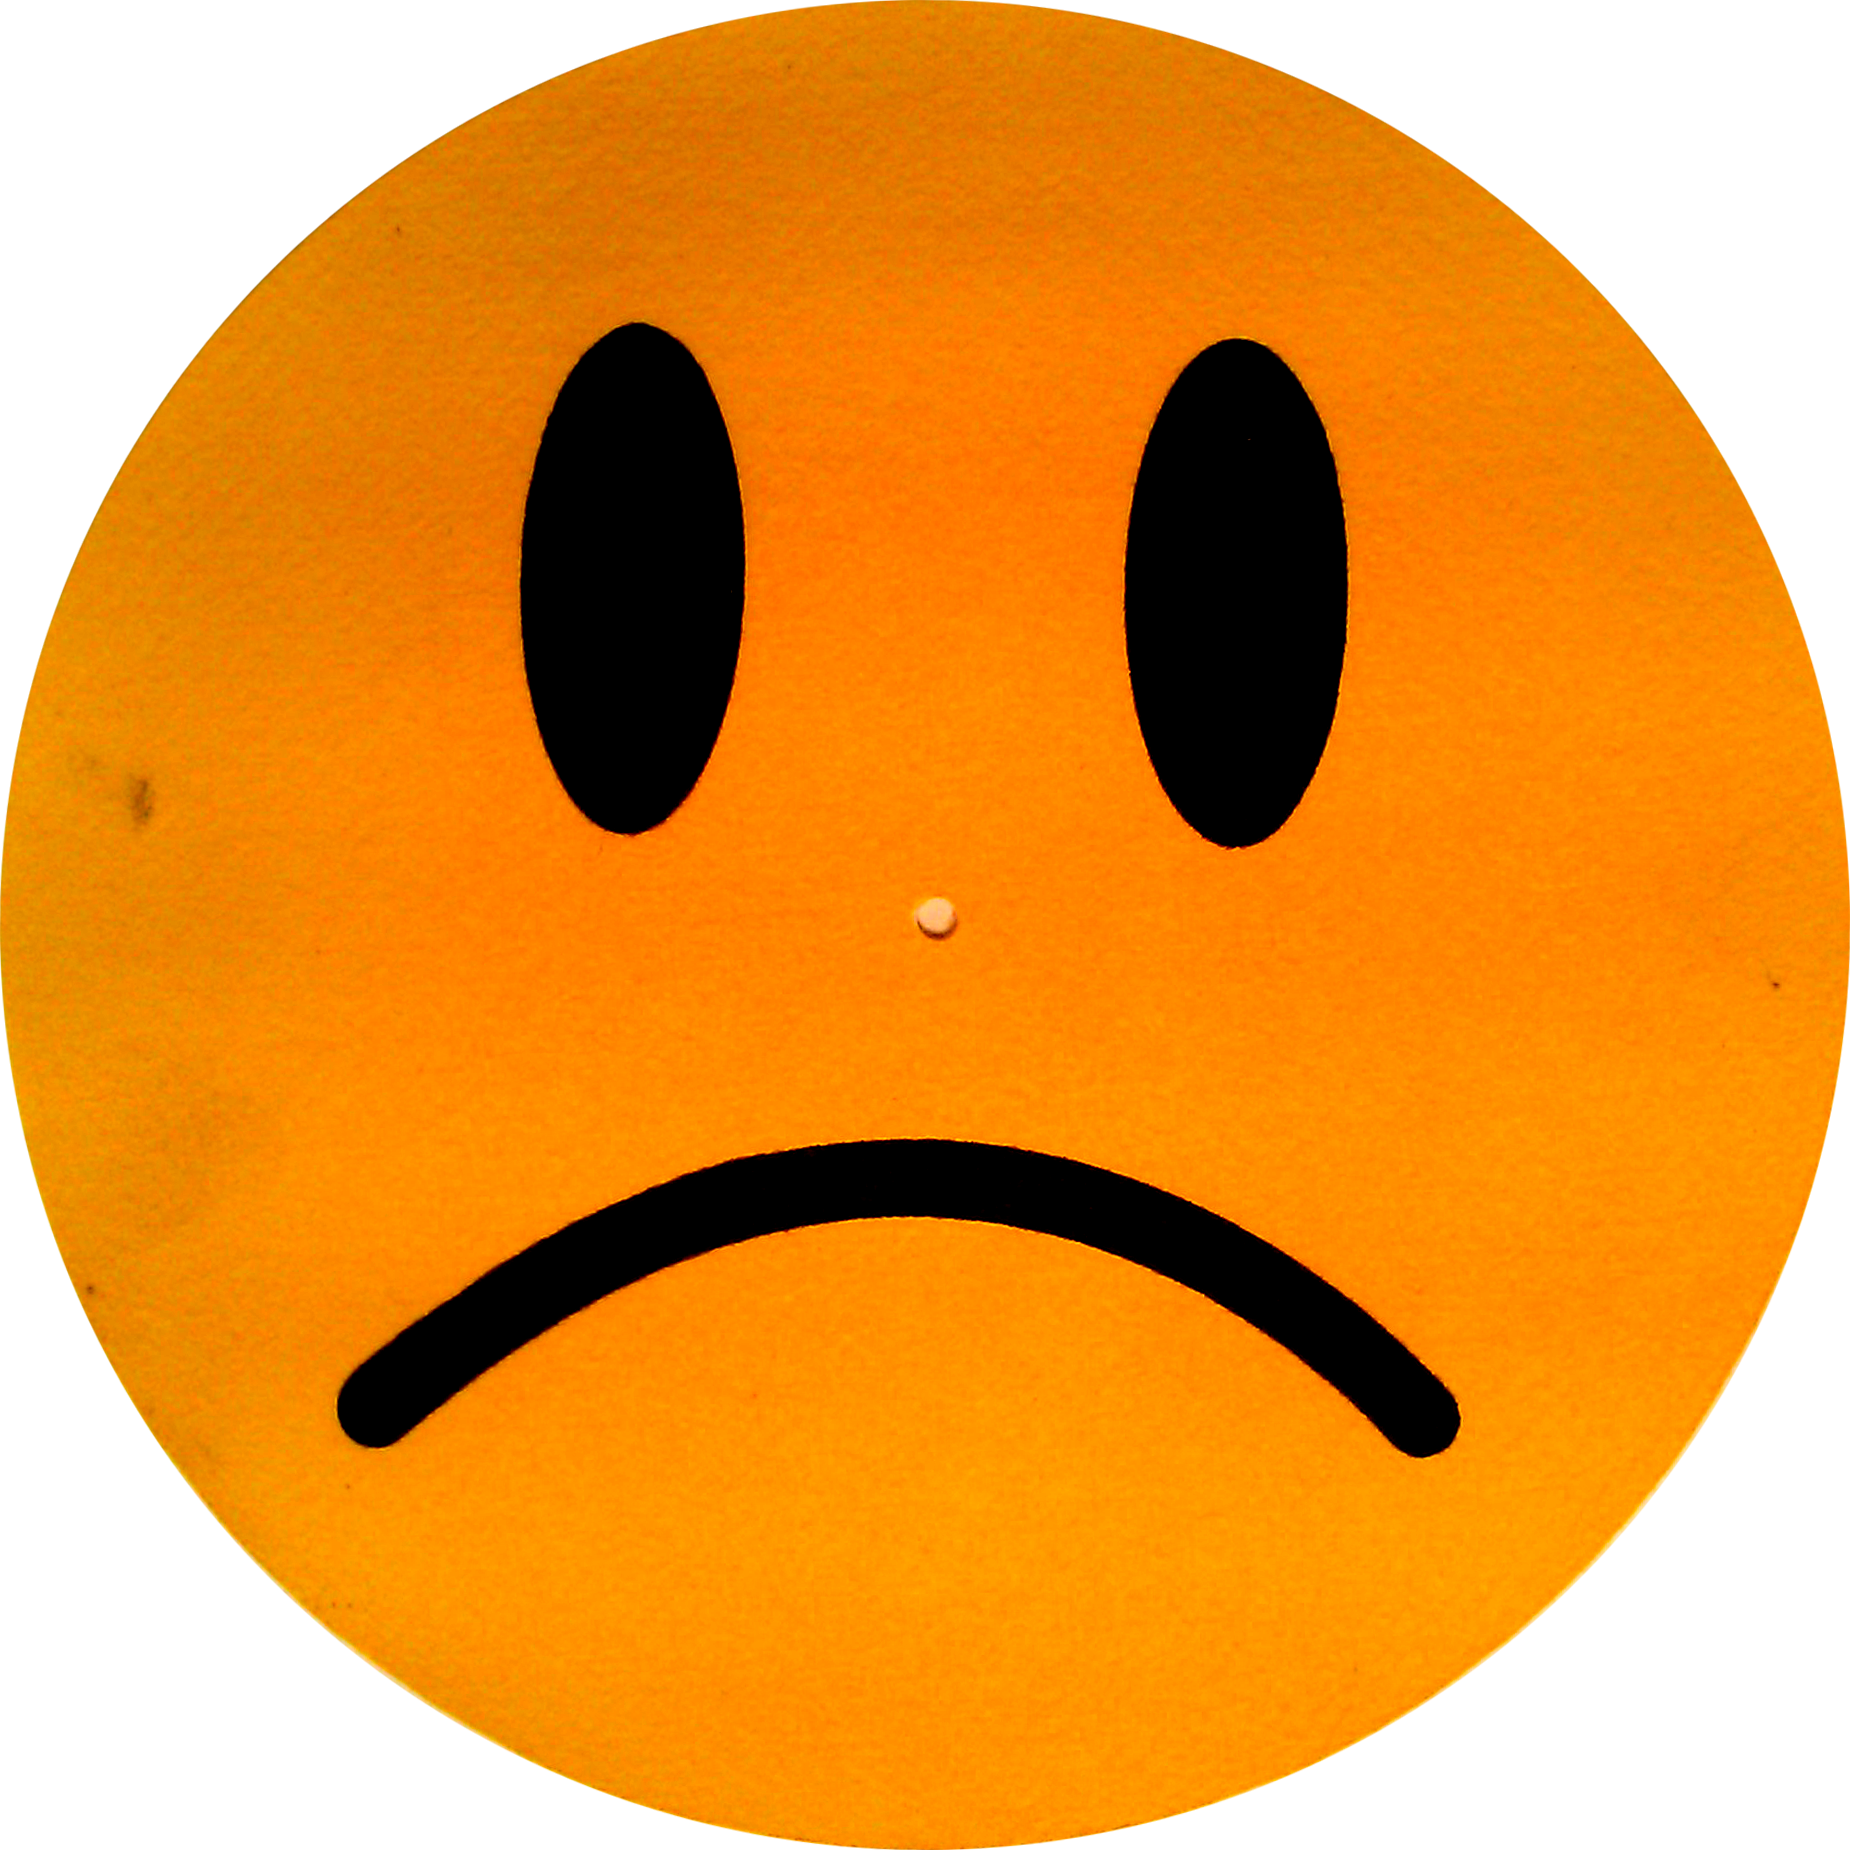 Unhappy Face Unhappy Face Unhappy Faces Images Sad Face Animation ...